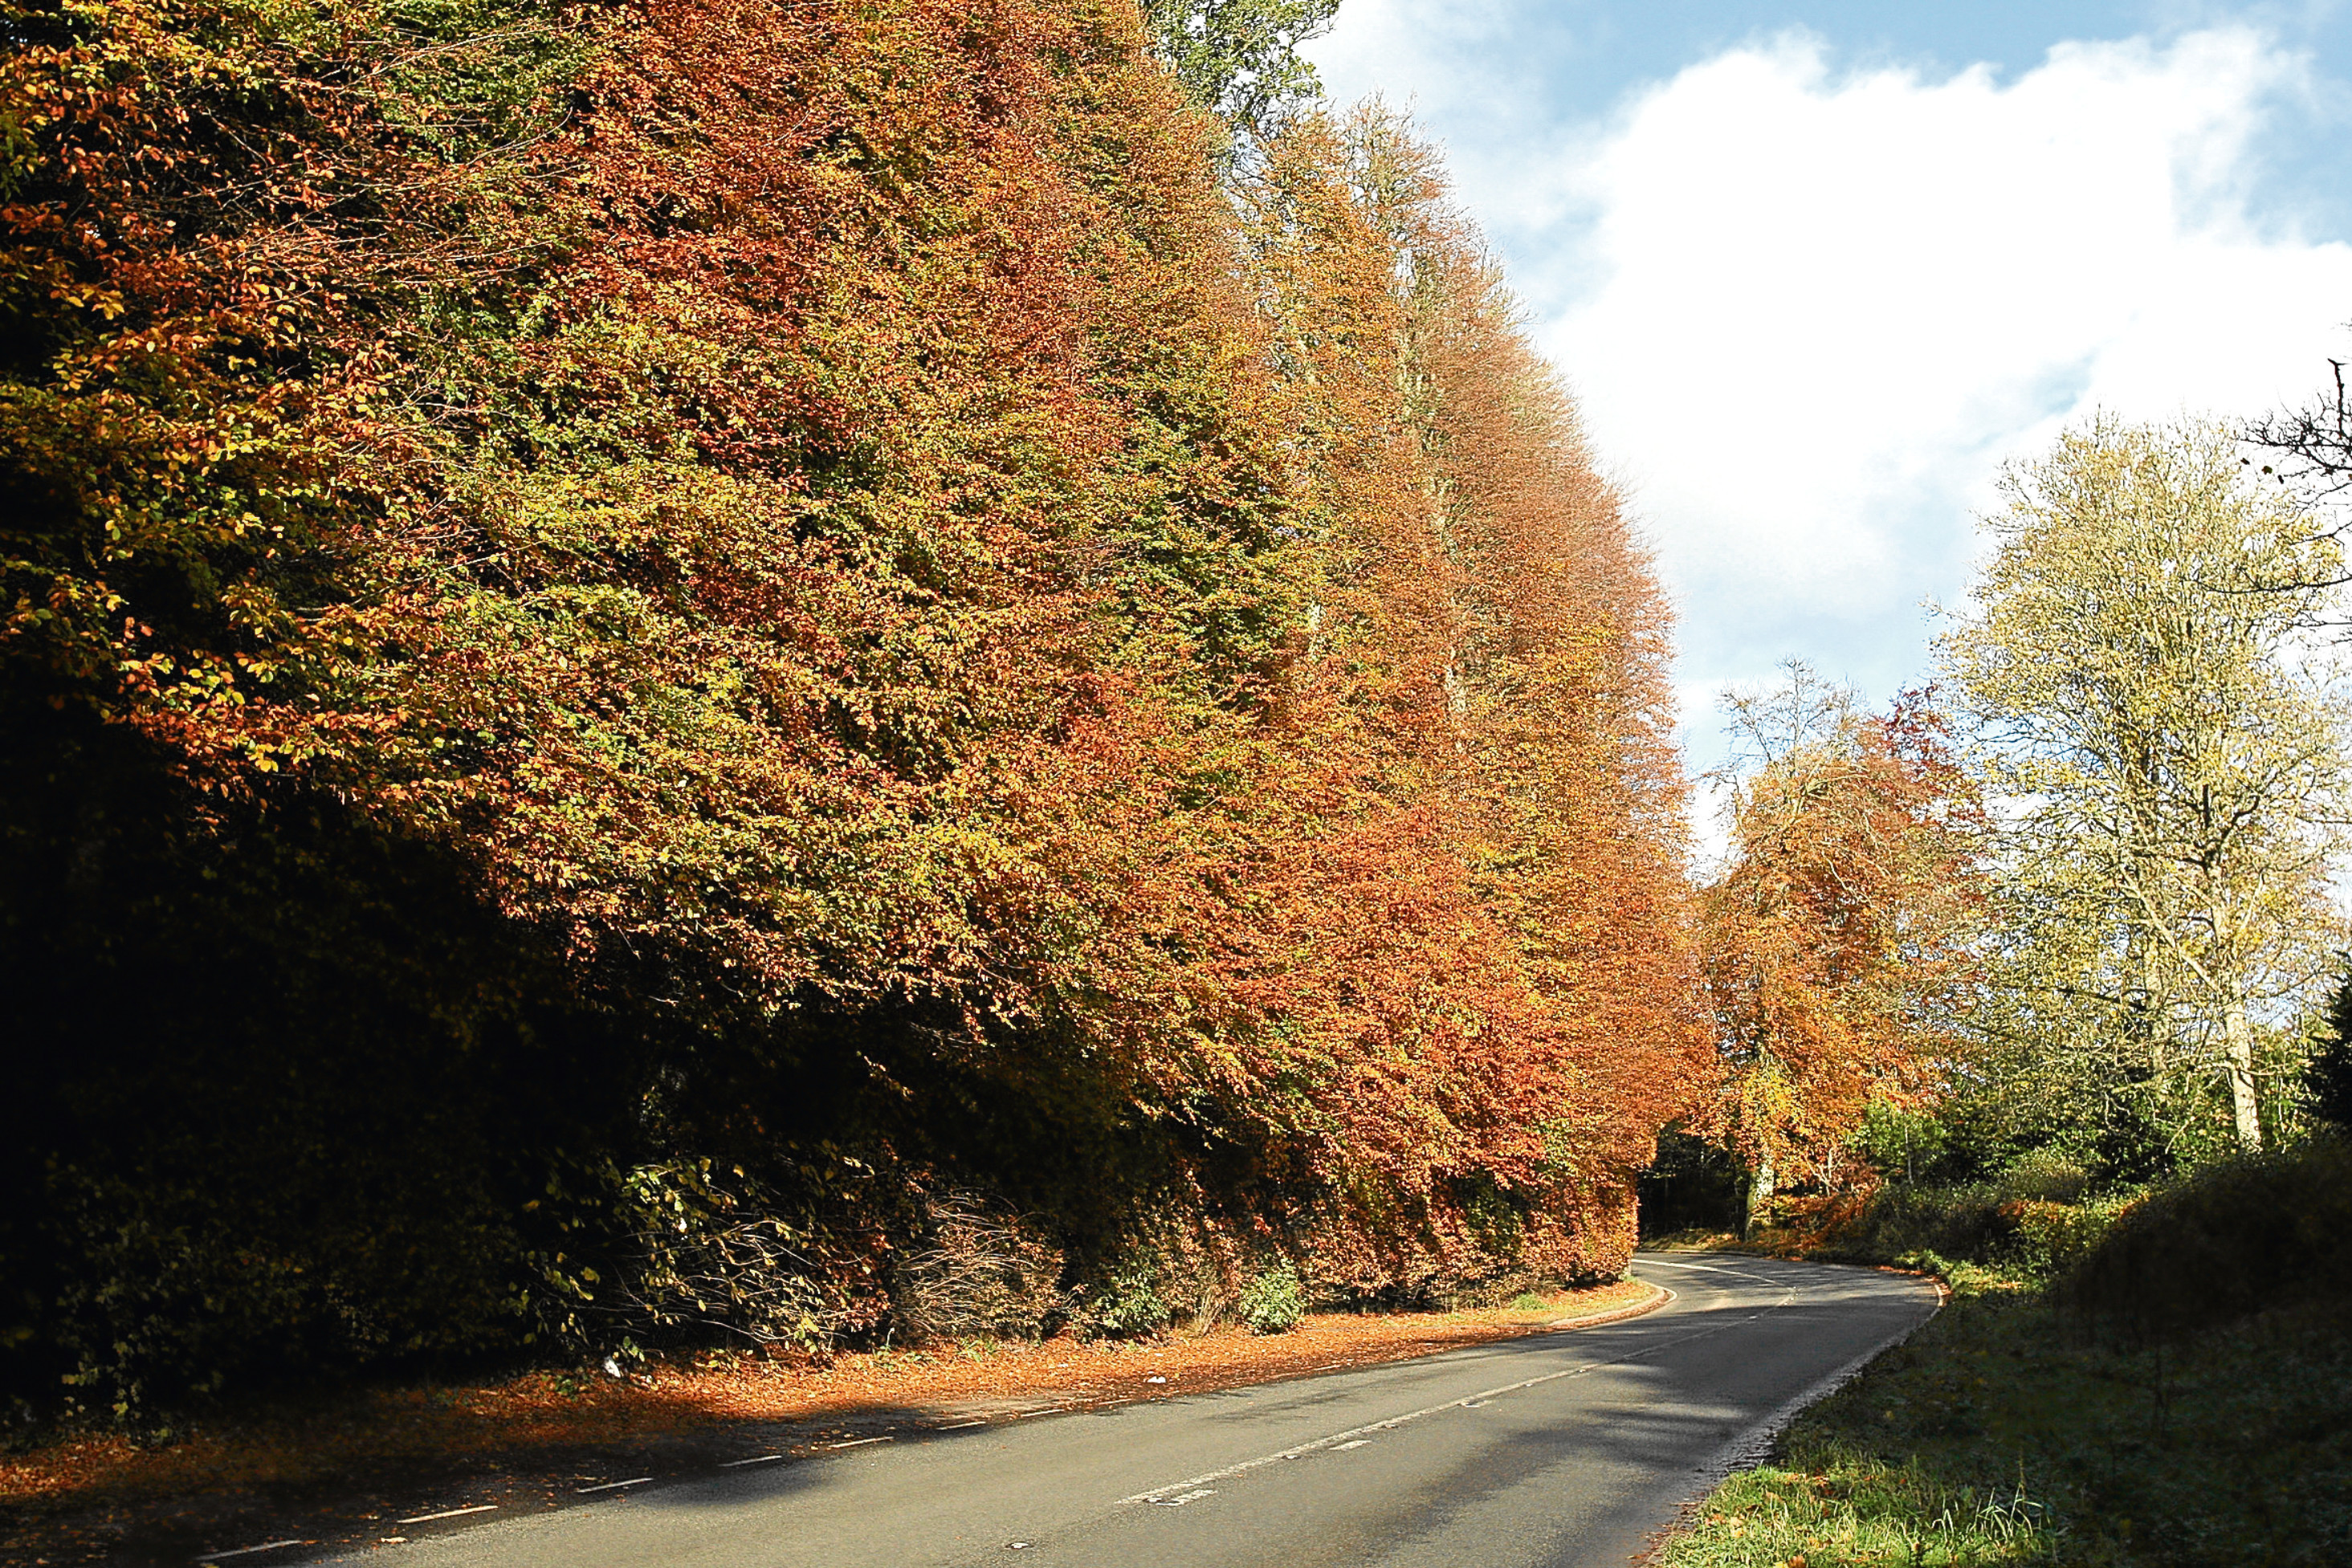 General view of the Meikleour Beech Hedges, near Meiklour in the autumn sun.   Meikleour Beech Hedge